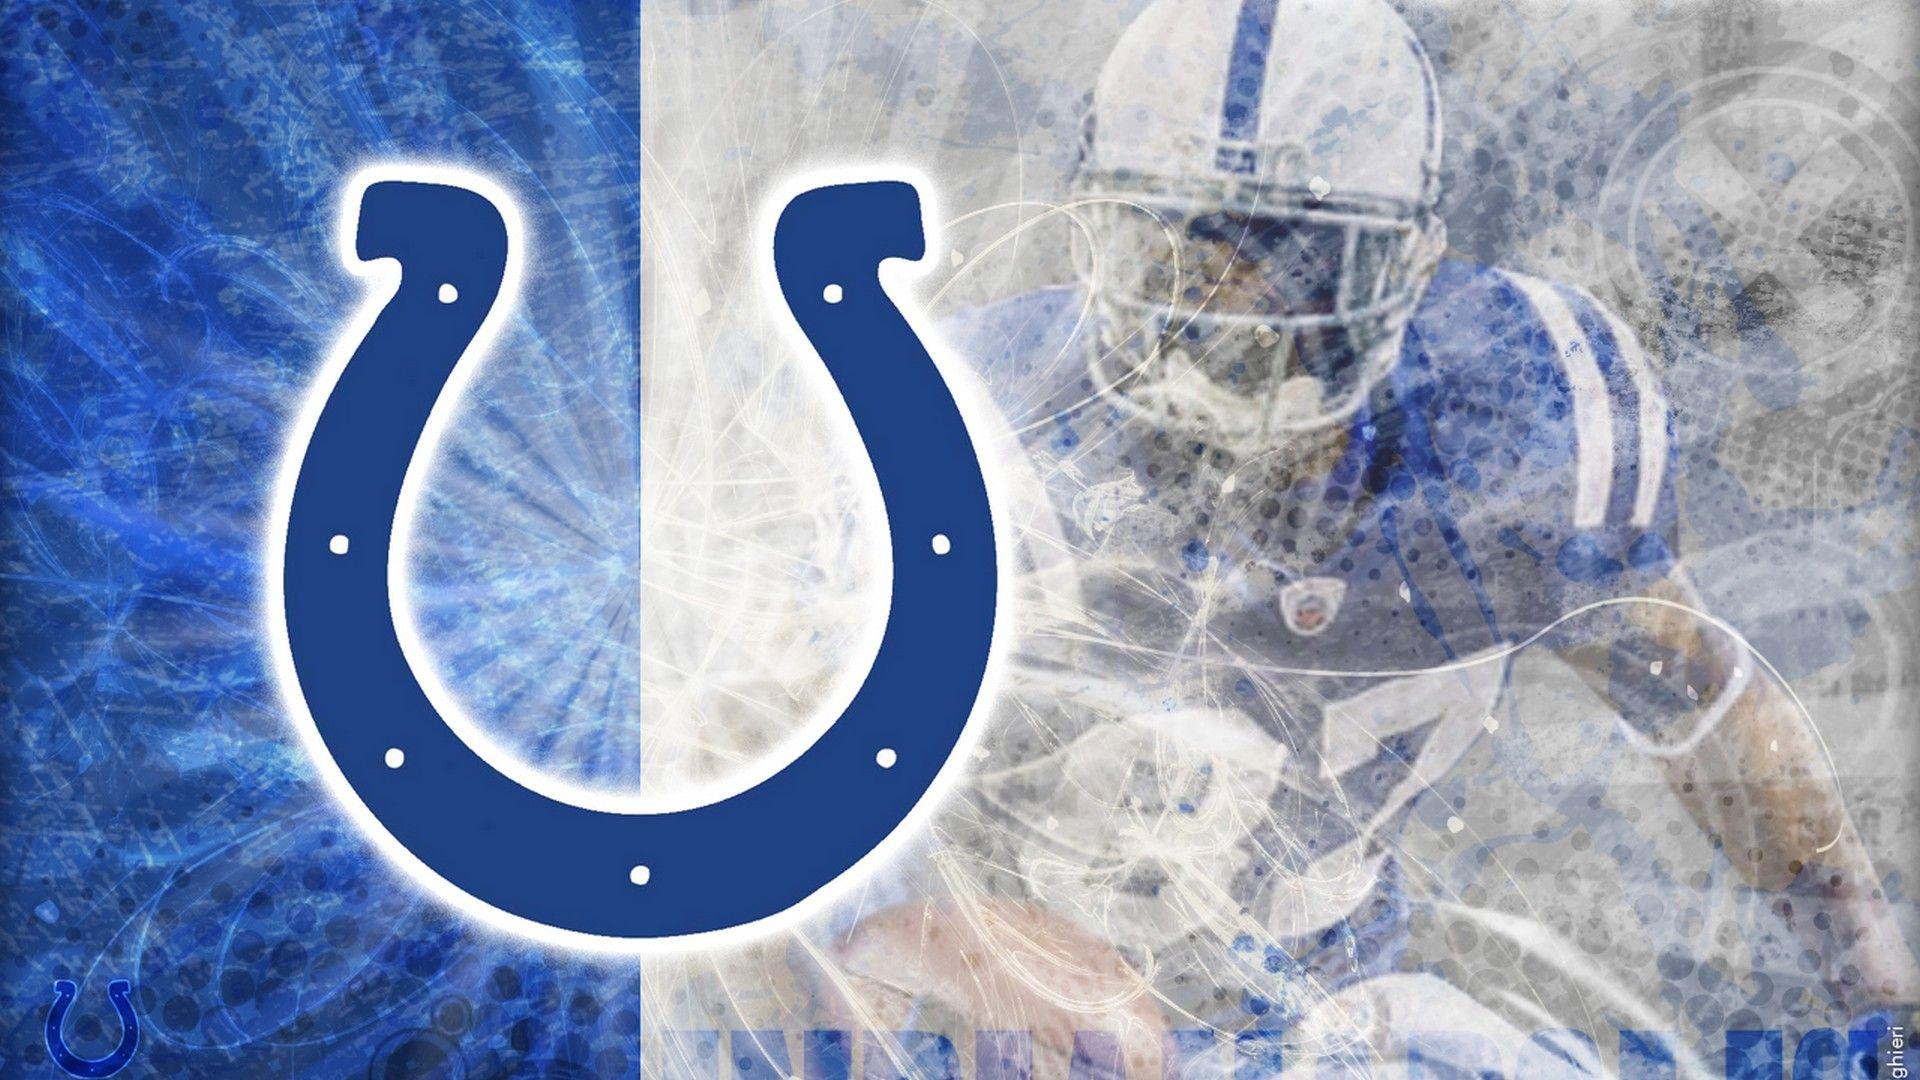 Indianapolis Colts Background HD. Wallpaper. Indianapolis colts